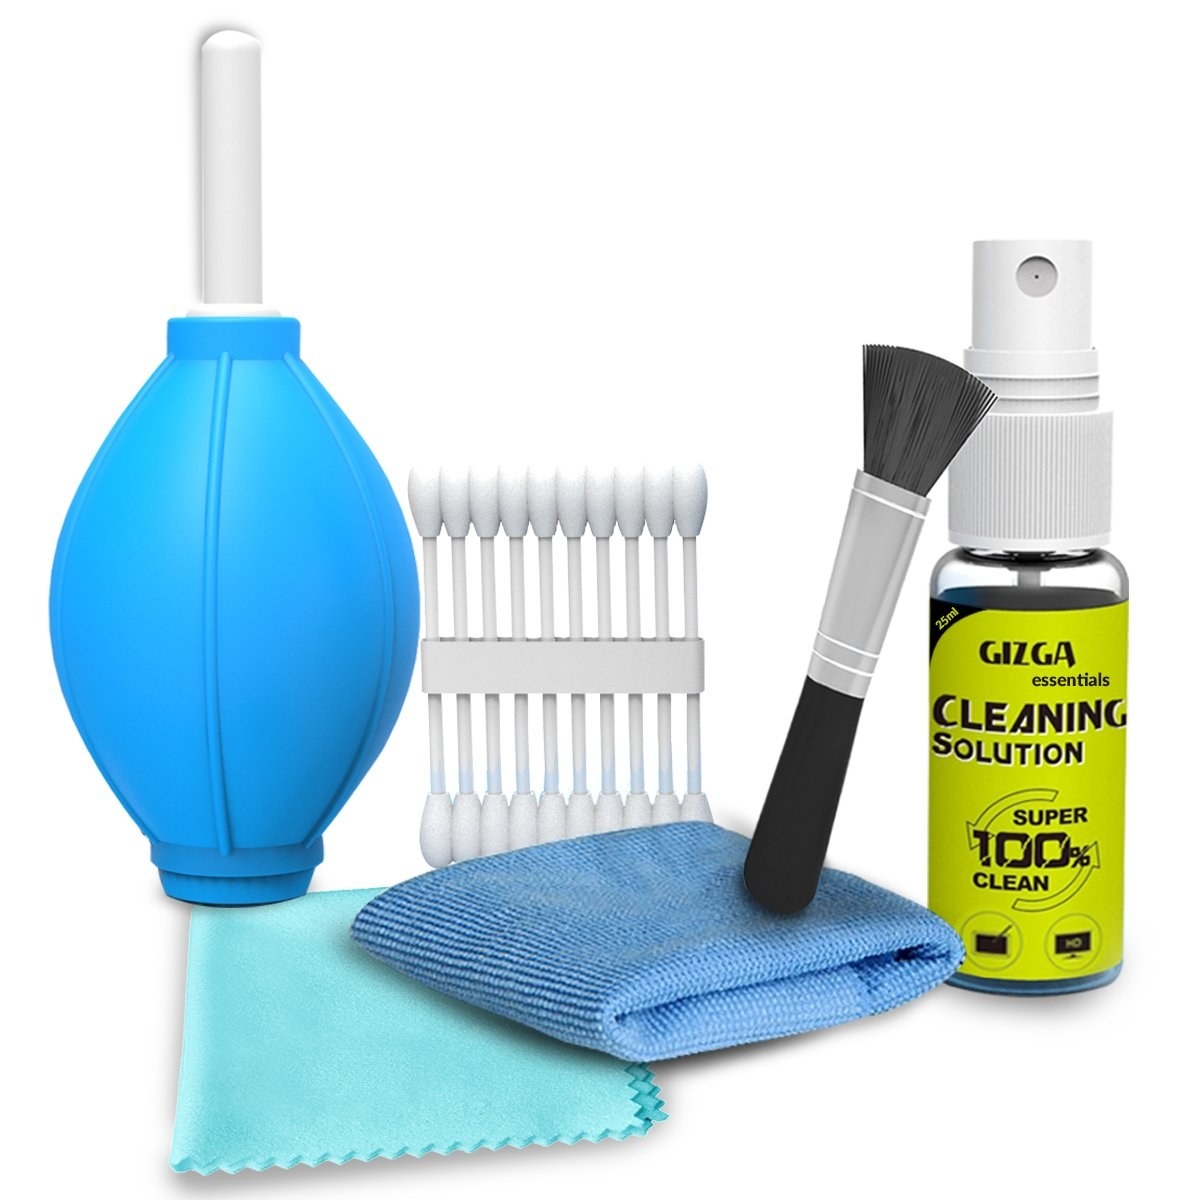 The kit contains an Air Blower, Cotton Swabs, a Micro-Fiber Cloth, an Anti-static Cleaning Brush and an Antibacterial Cleaning Solution.